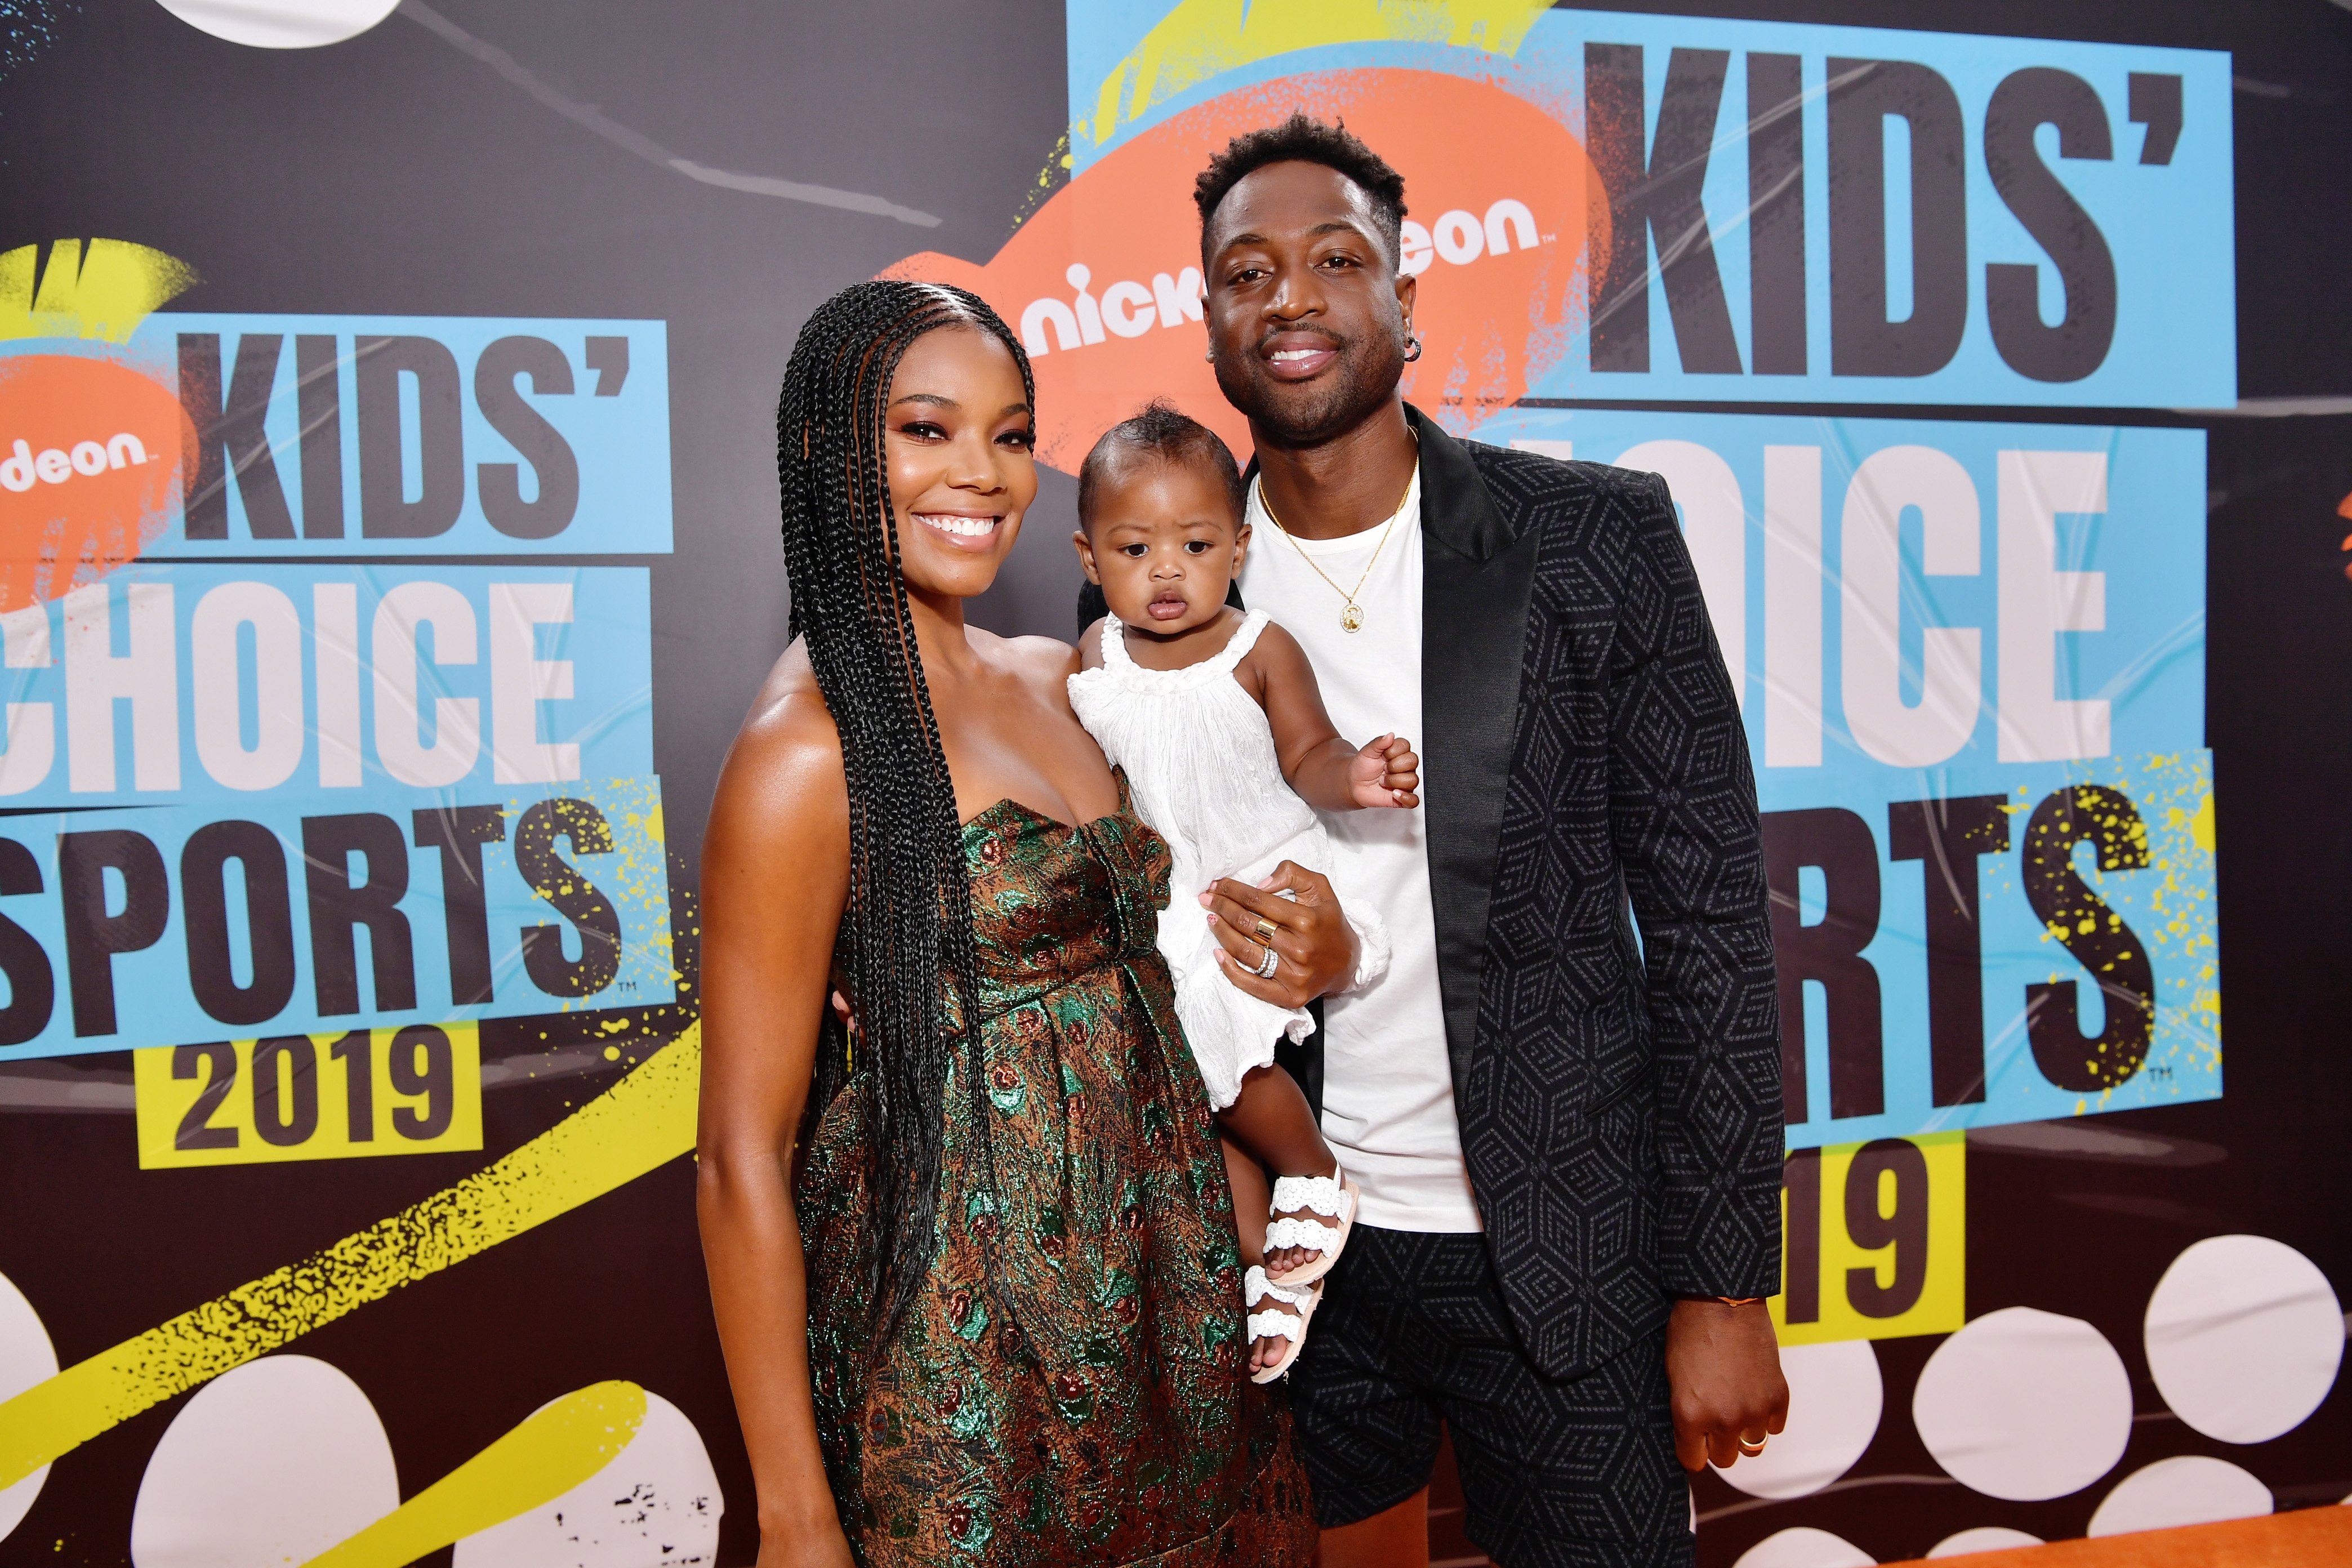 Parents Gabrielle Union and Dwyane Wade with their daughter, Kaavia James at Nickelodeon KIds' Choice Sports 2019. | Photo: Getty Images